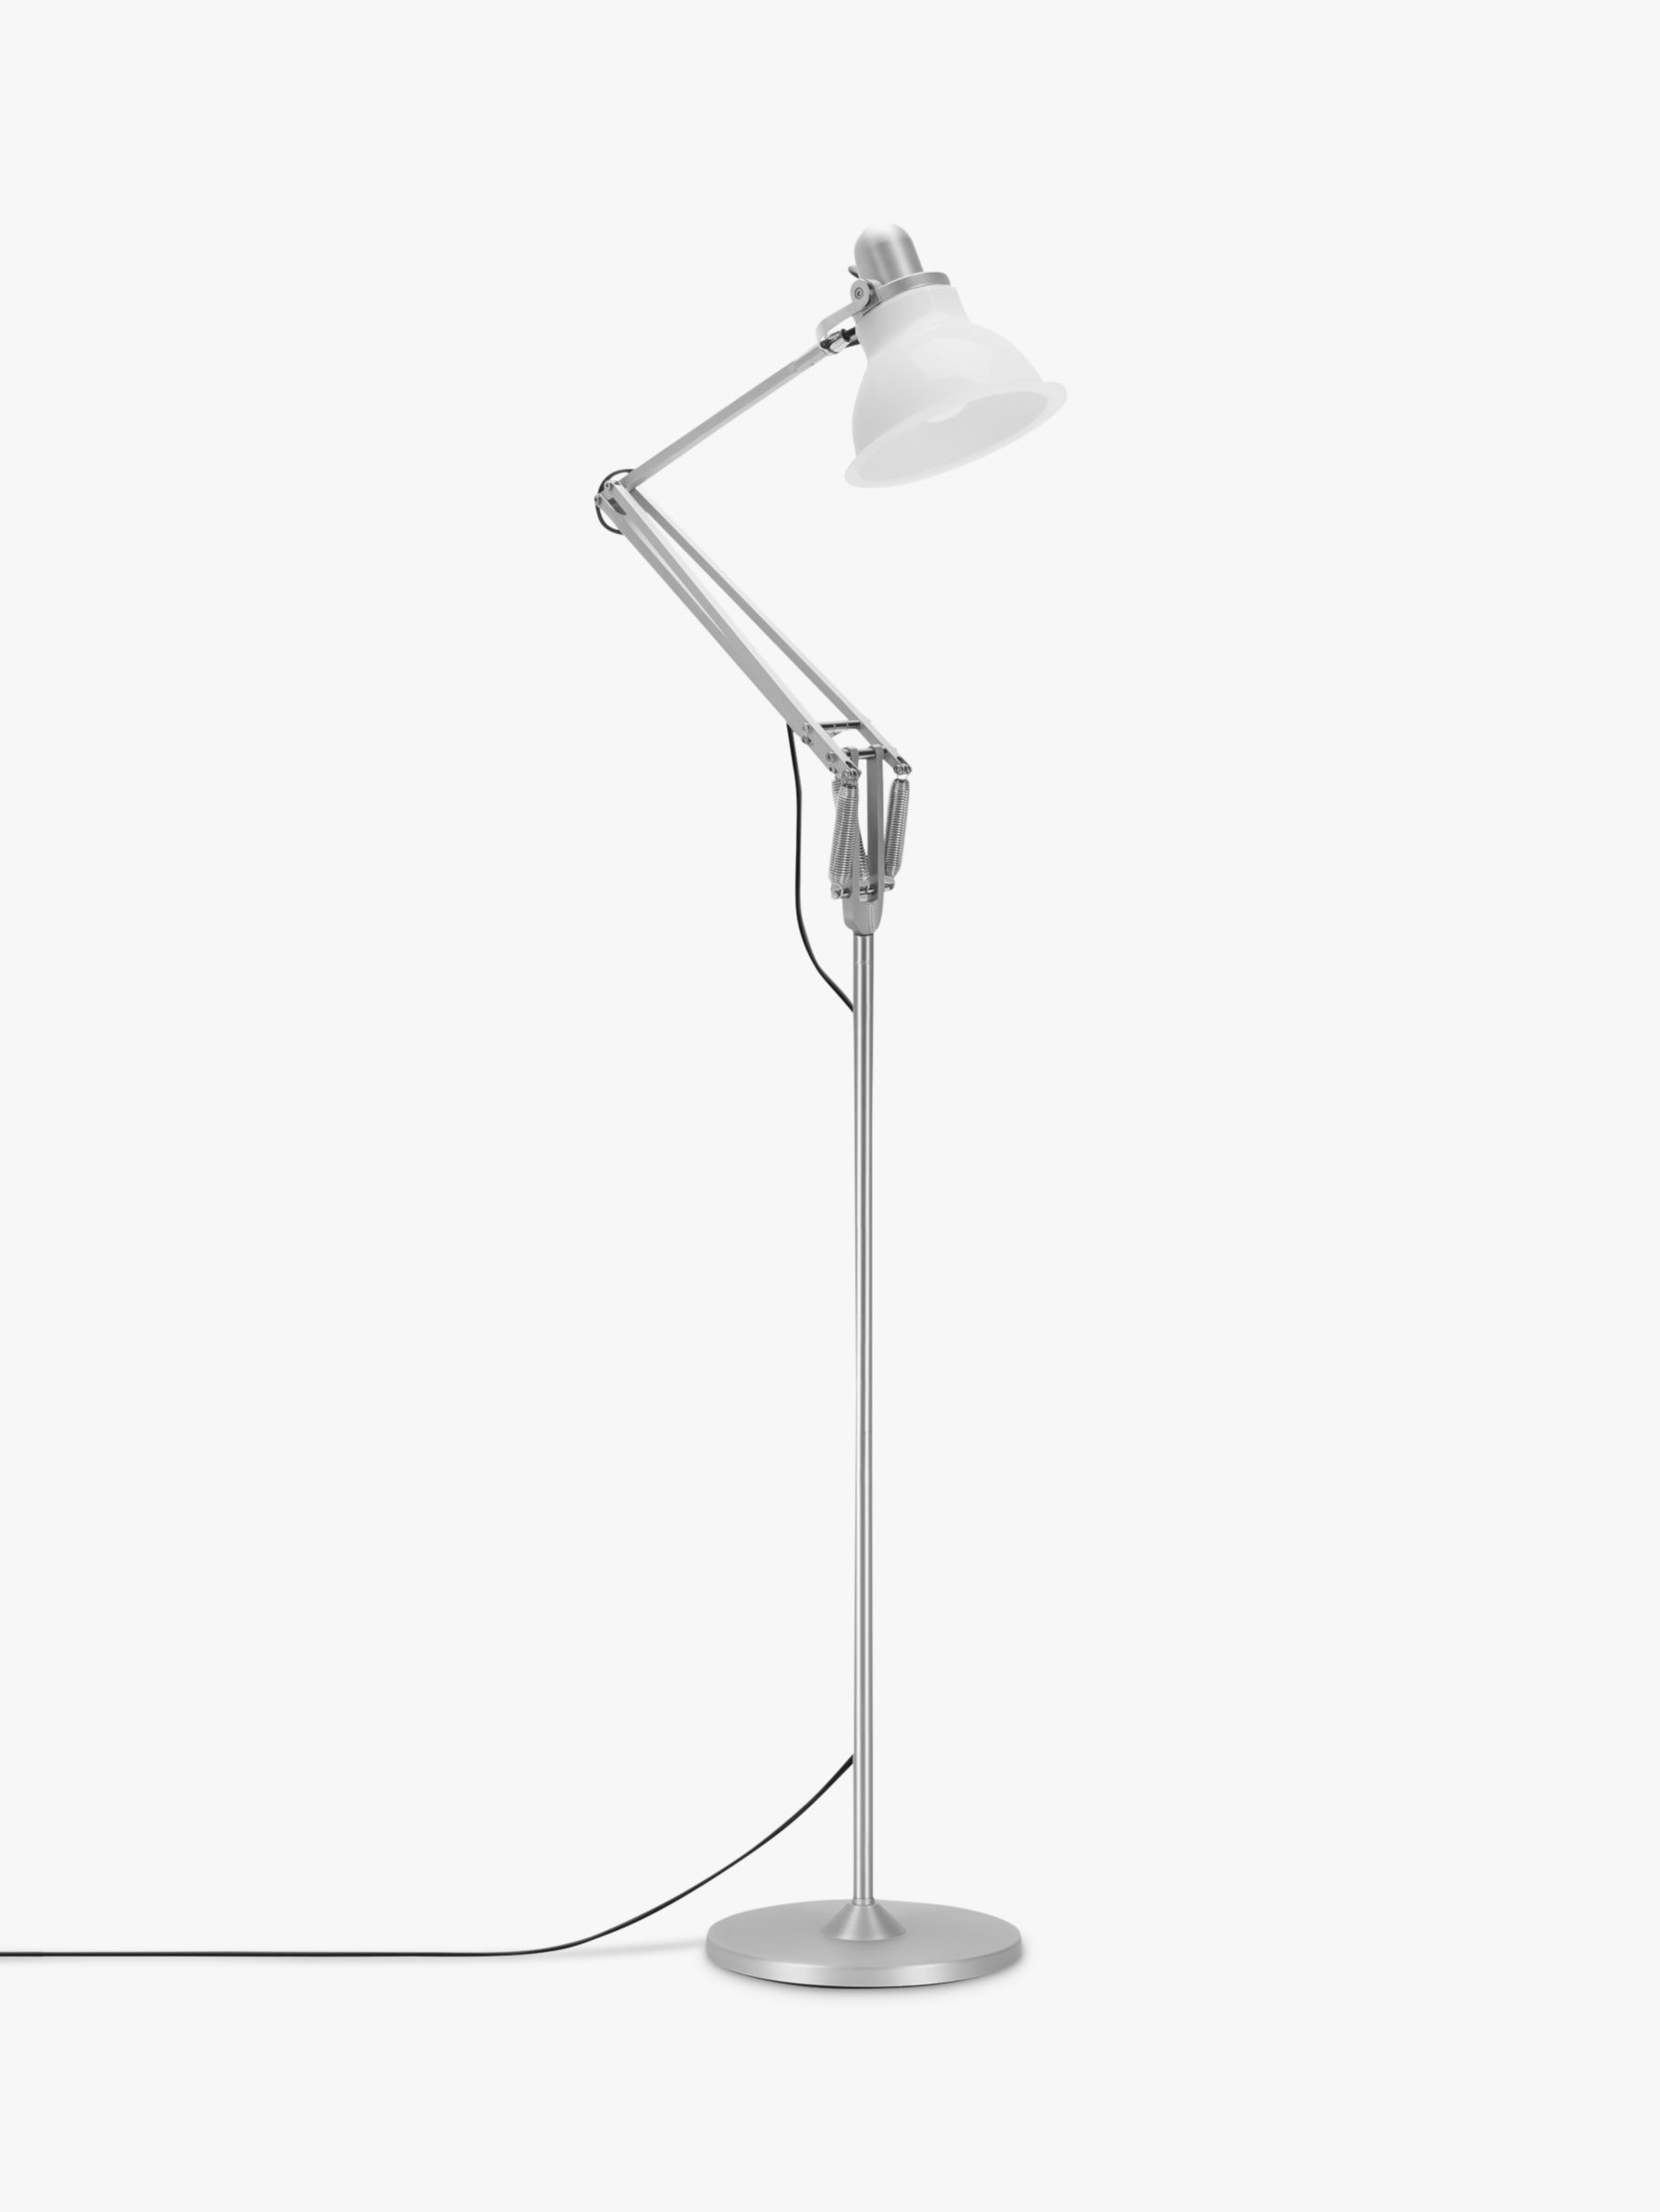 Anglepoise Type 1228 Floor Lamp Ice White At John Lewis Partners